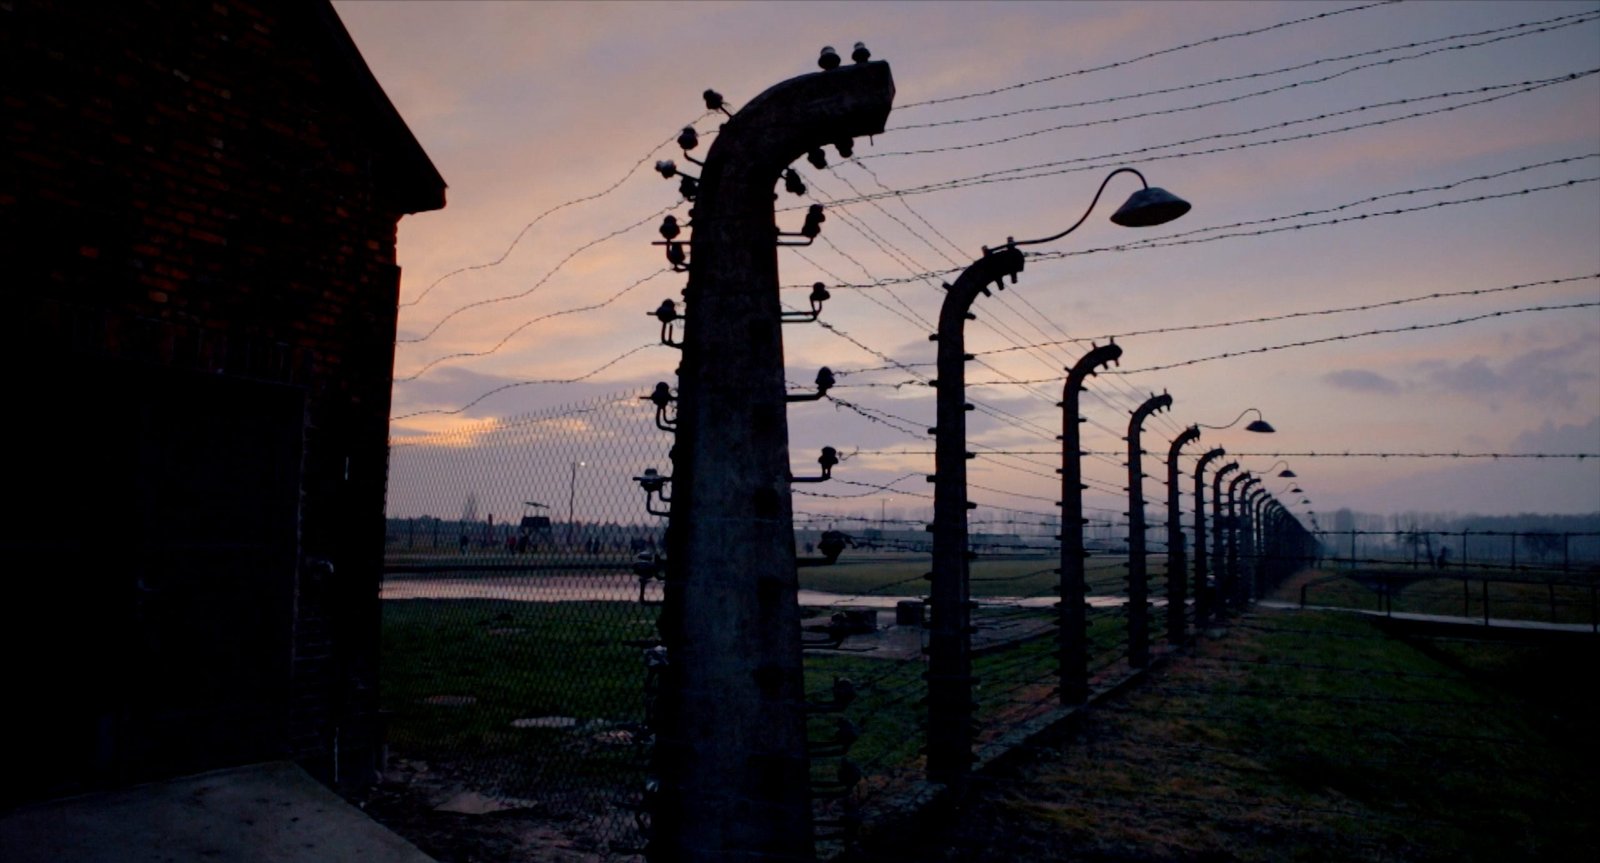 The Carousel Made of Barbed Wire (Finland) (2019) Directed by Jani Ahlstedt. Auschwitz II-Birkenau, concentration and extermination camp. Photo Jani Ahlstedt